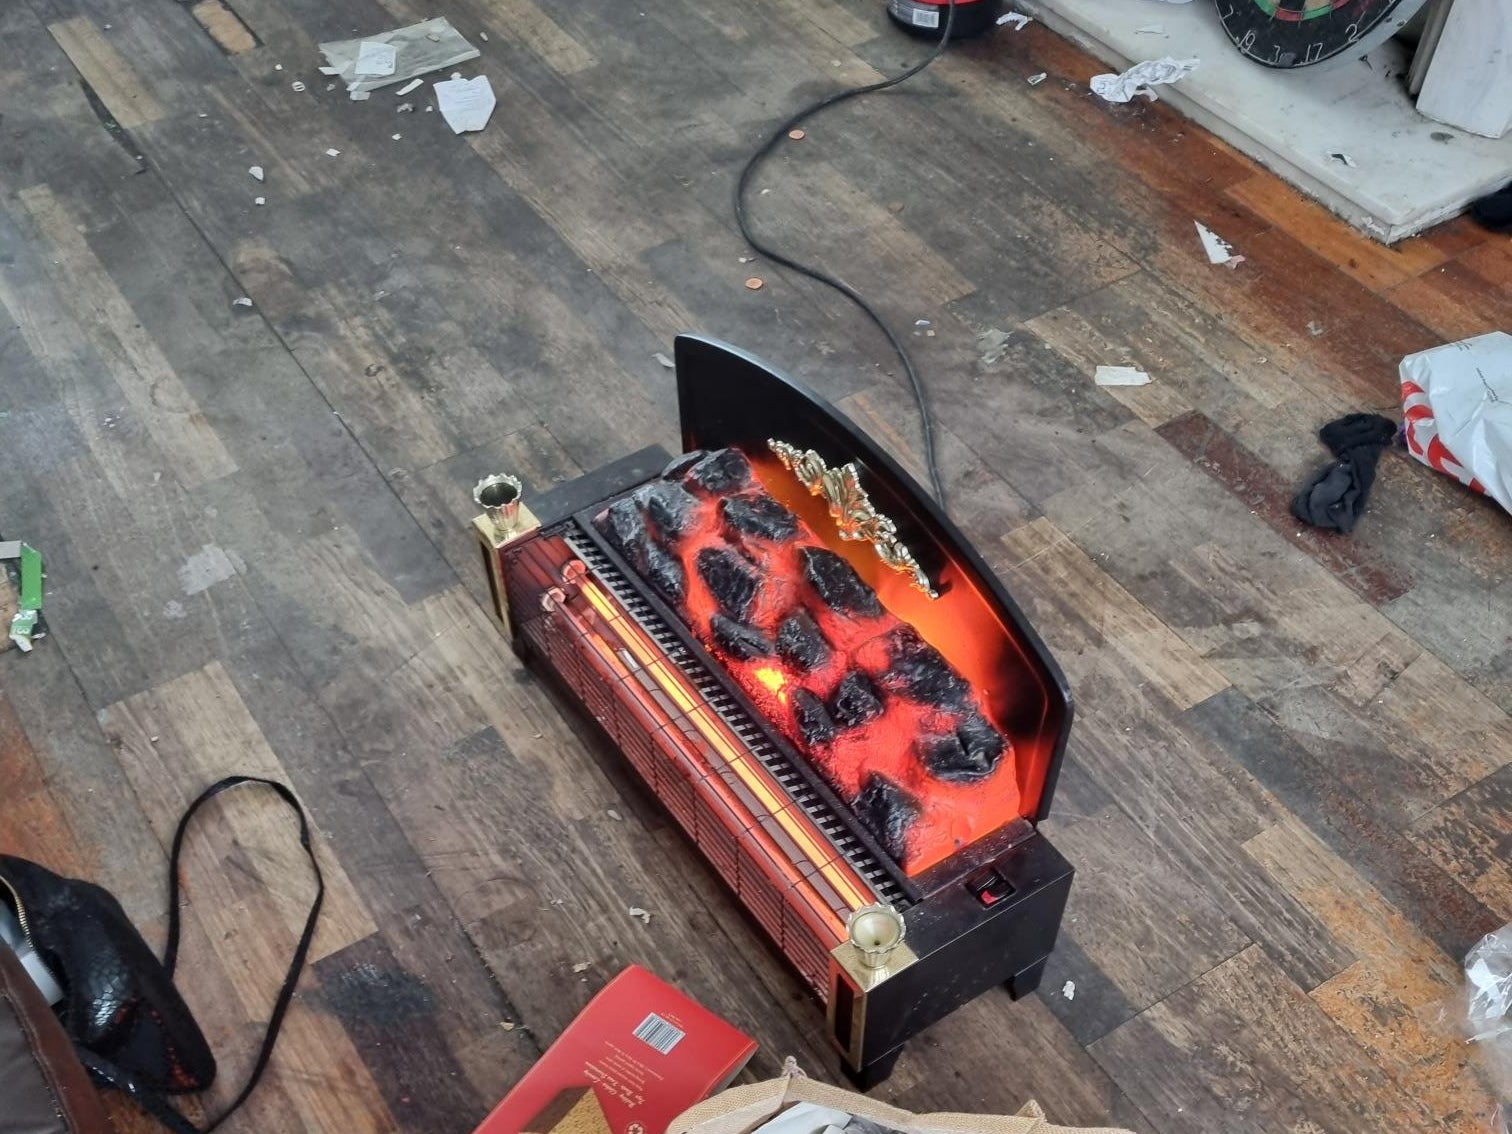 The elderly woman uses this electric heater to try and heat her house after her gas was isolated